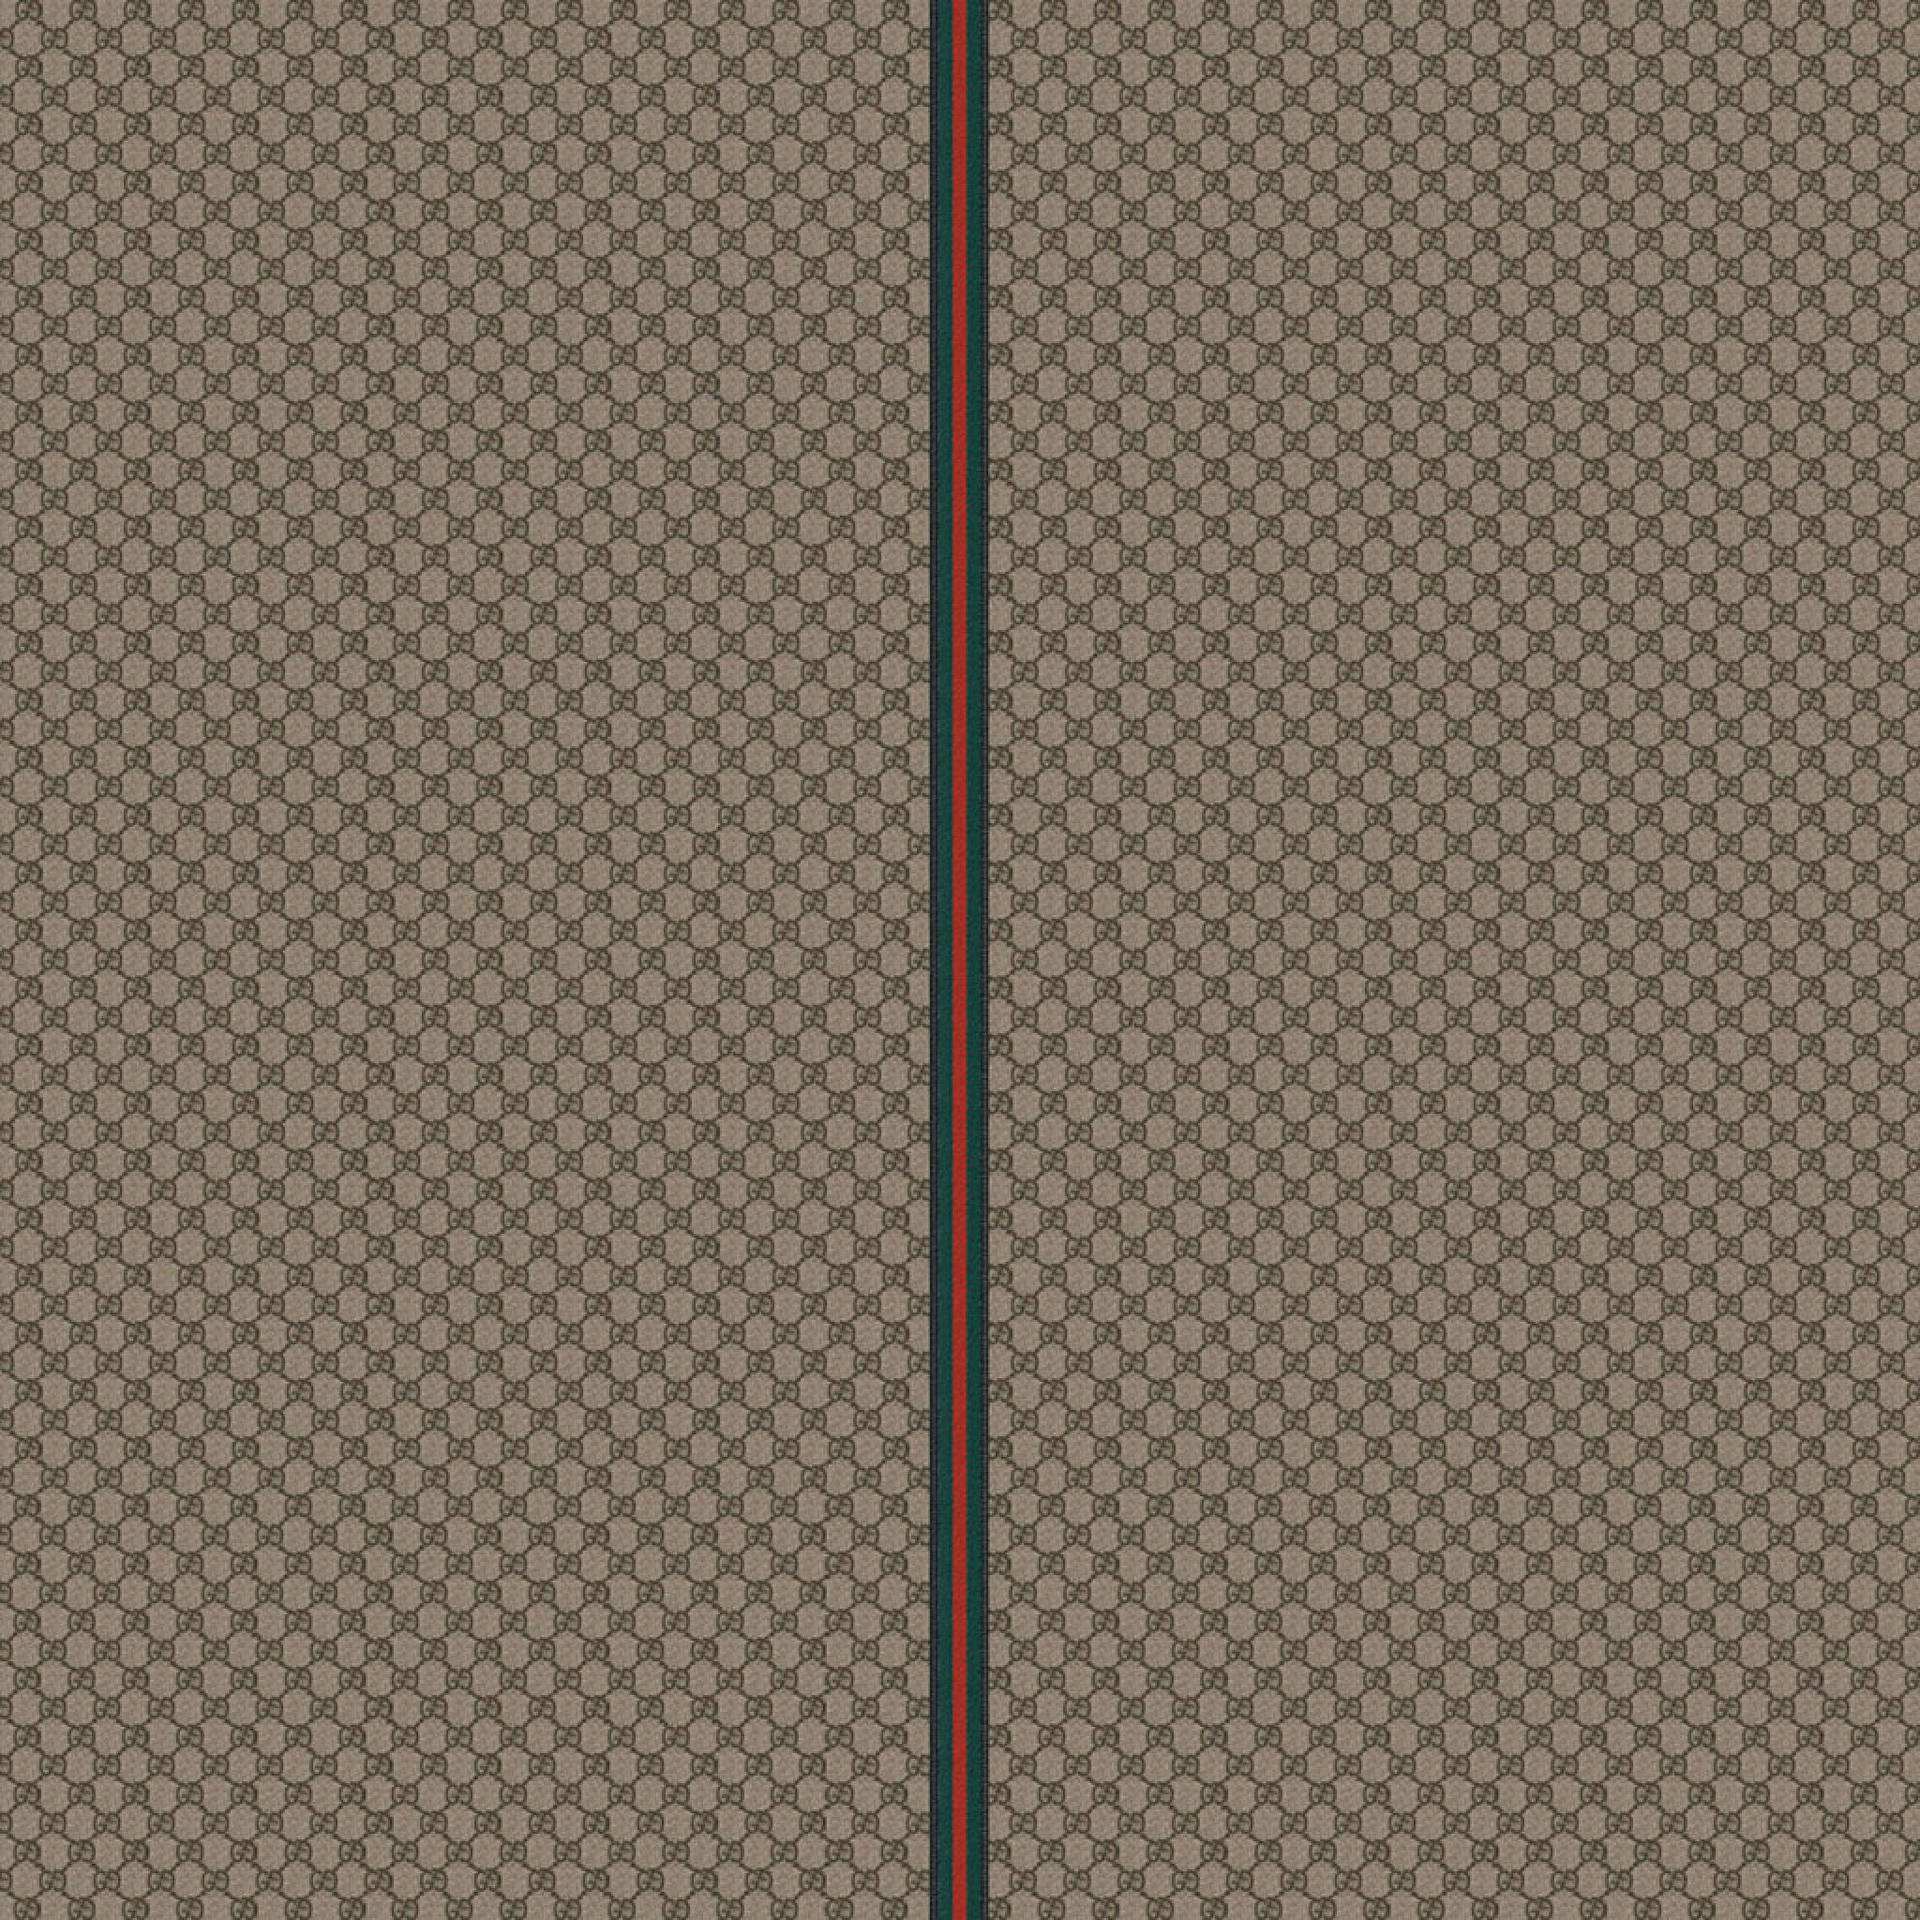 Leather Gucci Pattern Wallpaper